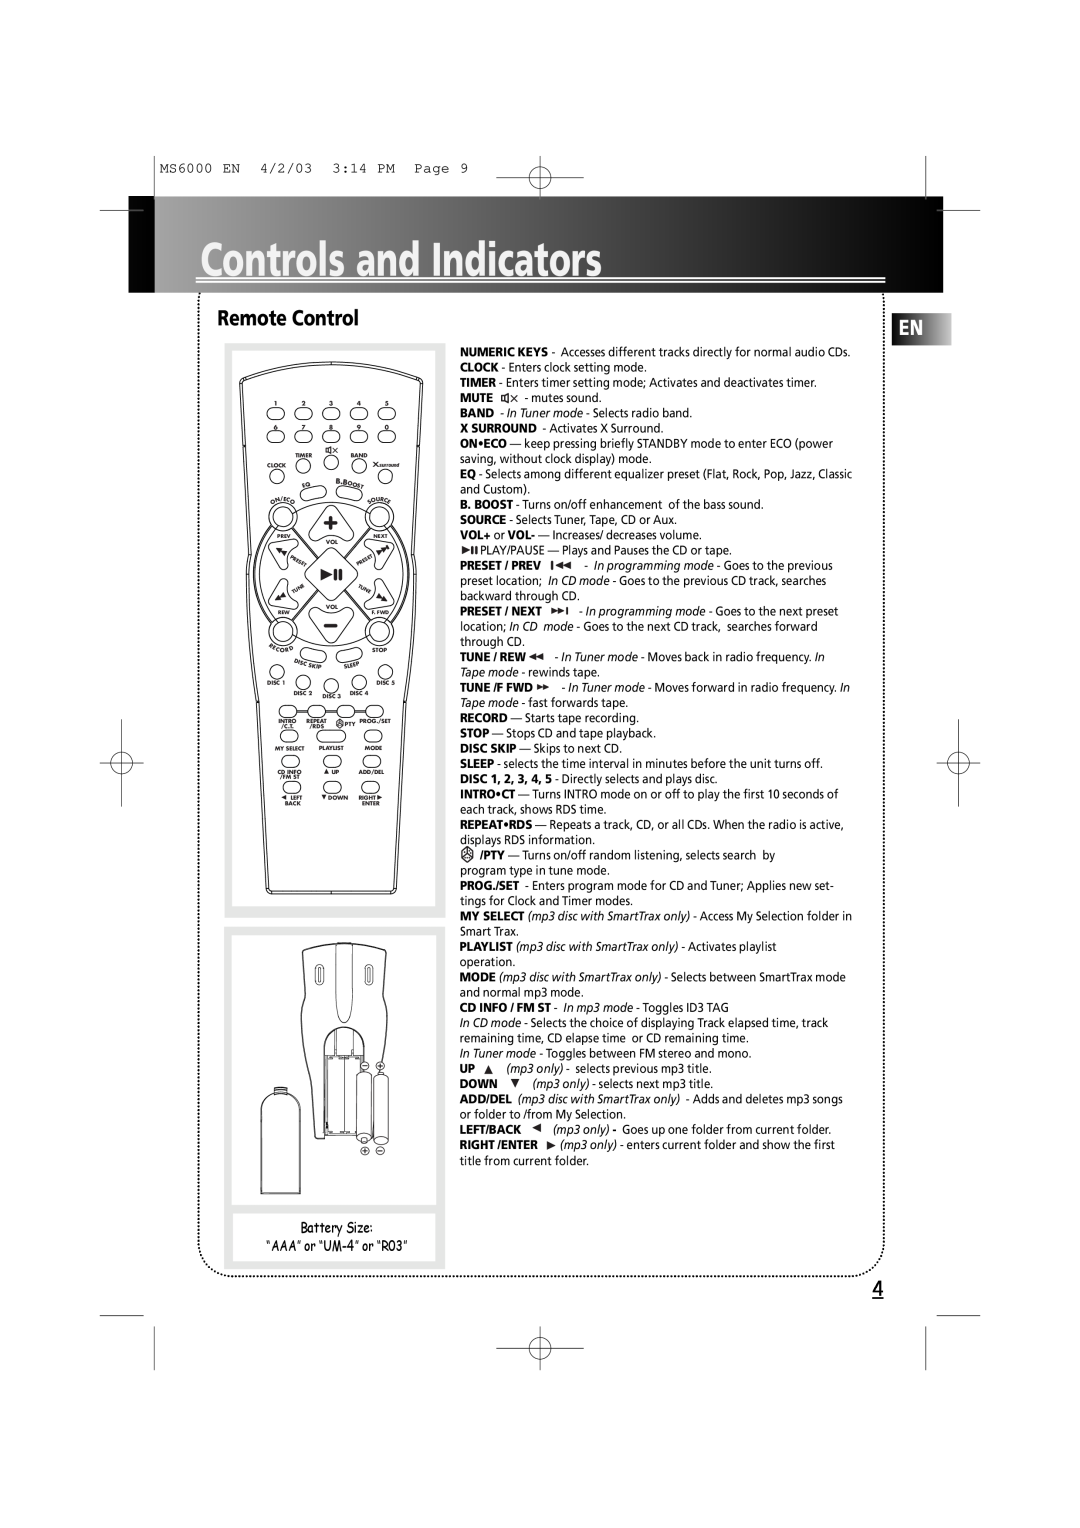 Technicolor - Thomson MS6000 Remote Control, Battery Size “AAA” or “UM-4”or “R03”, Controls and Indicators, Preset / Next 